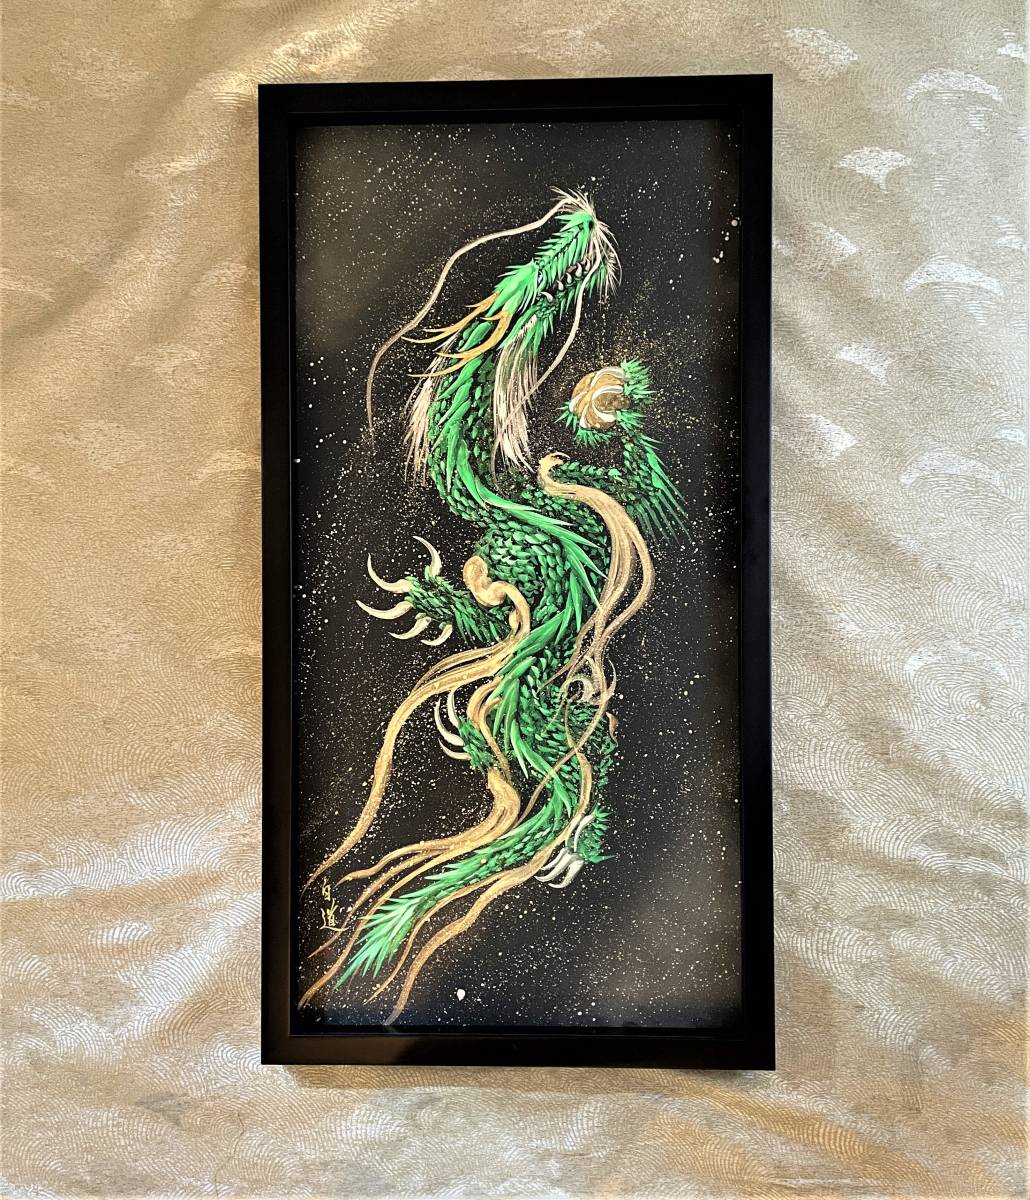 ☆Modern ink painter, artist Hakudou☆ Blue Dragon Ascension Hand-painted work (with certificate of authenticity) ART☆Hakudou Dragon Painting Modern Art Free shipping♪, Artwork, Painting, others